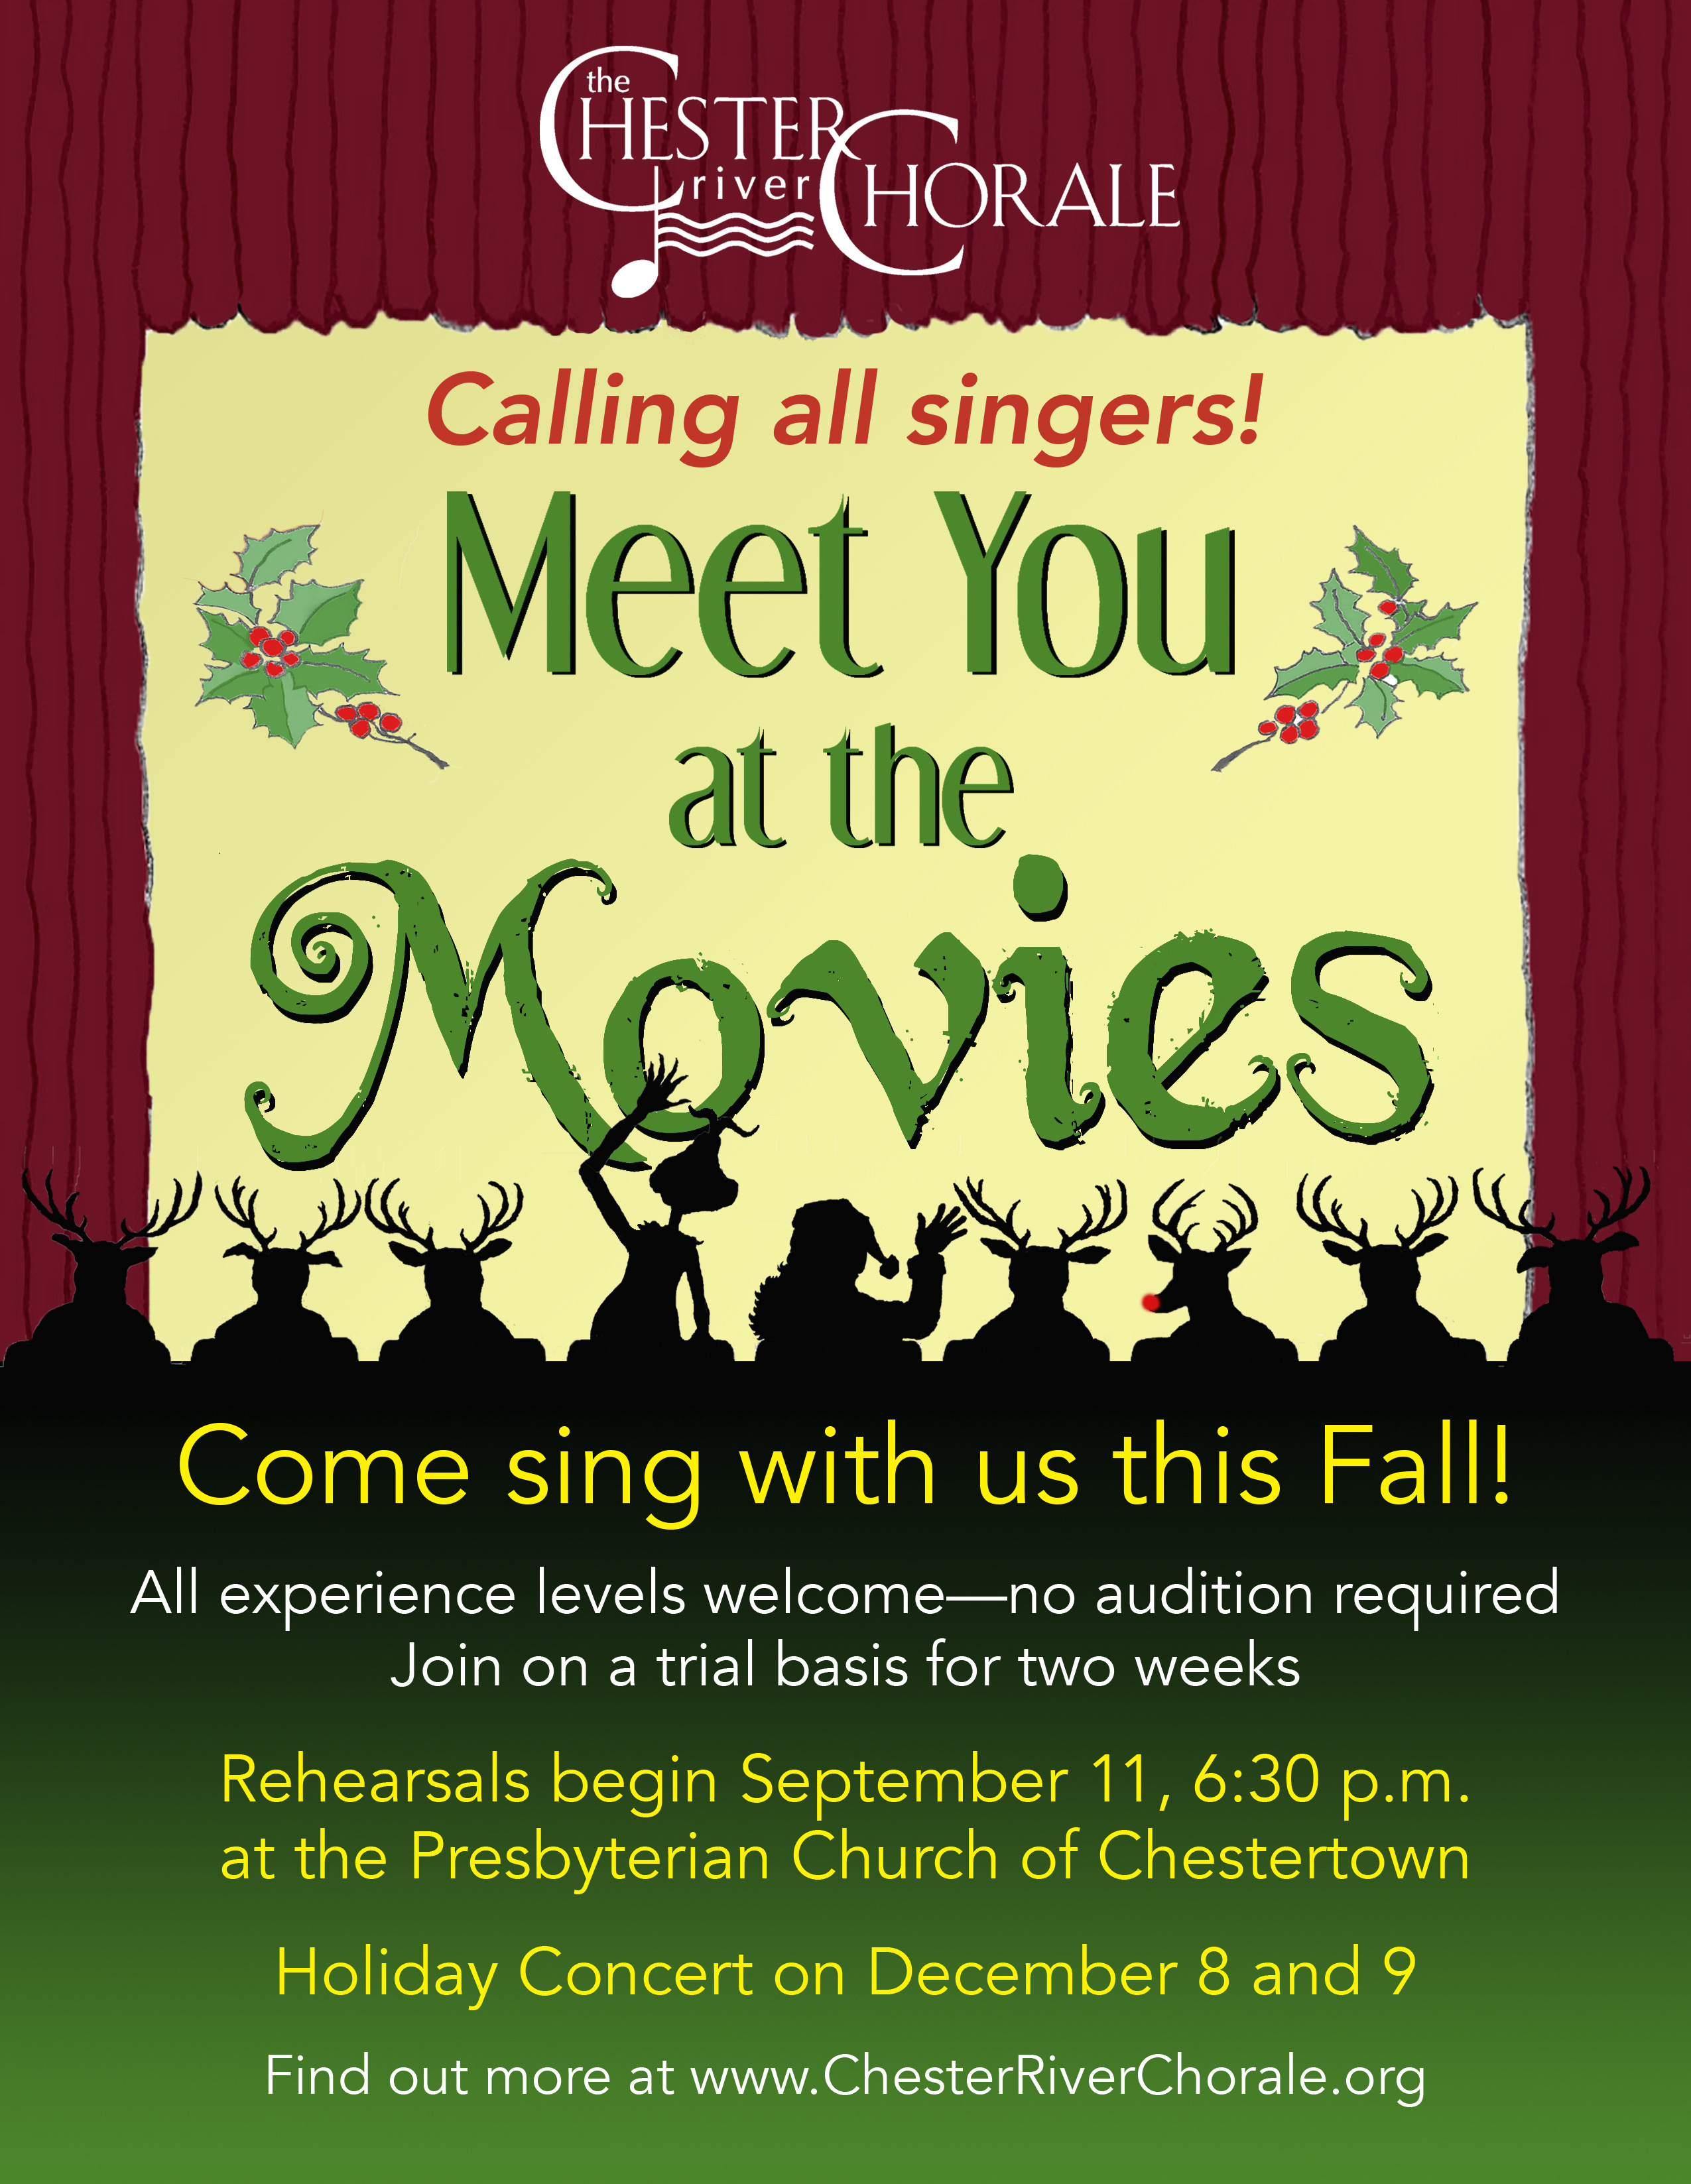 CALLING ALL SINGERS